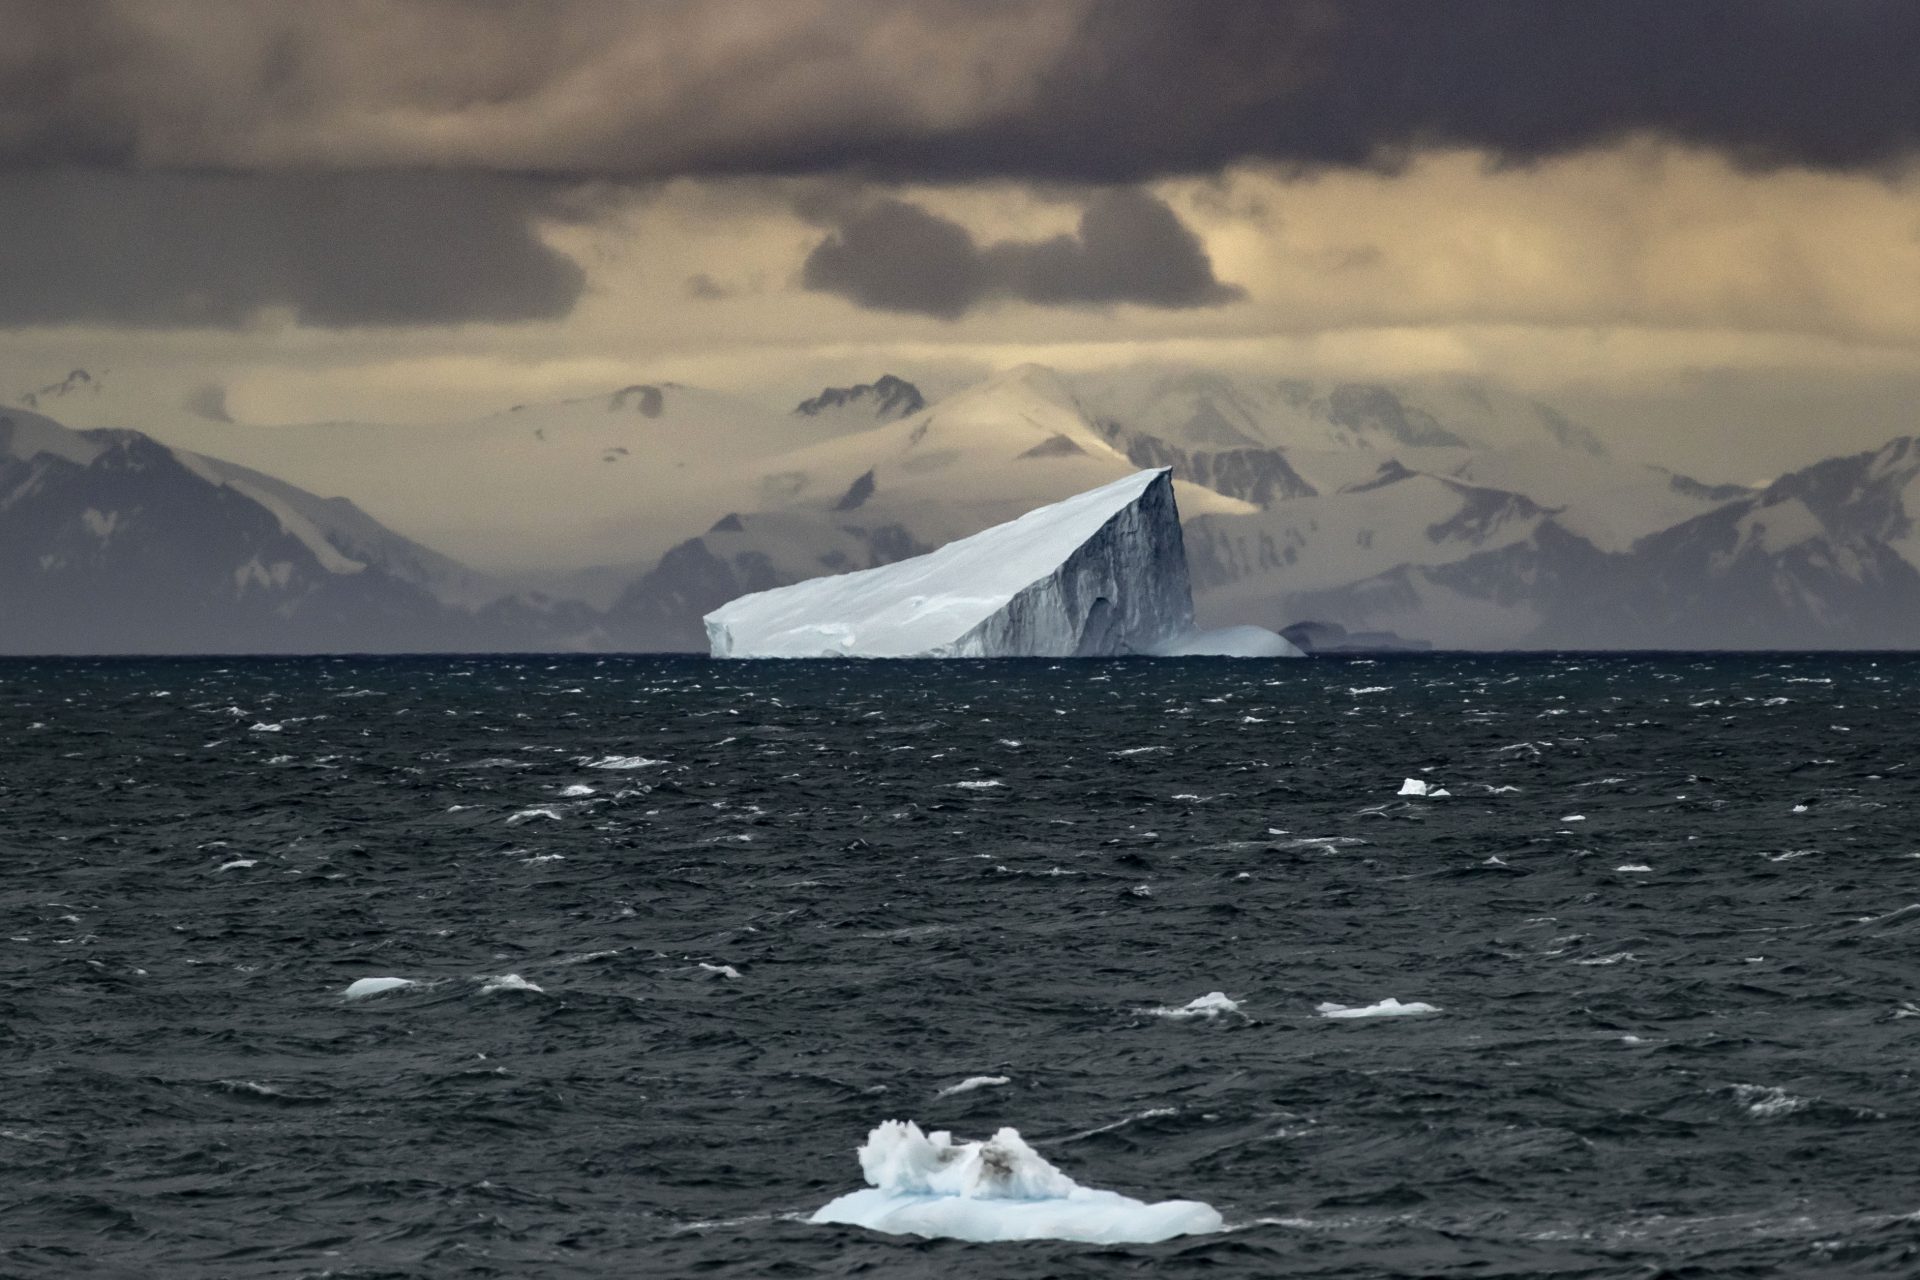 A growing problem in Antarctic could soon become a major disaster for the world